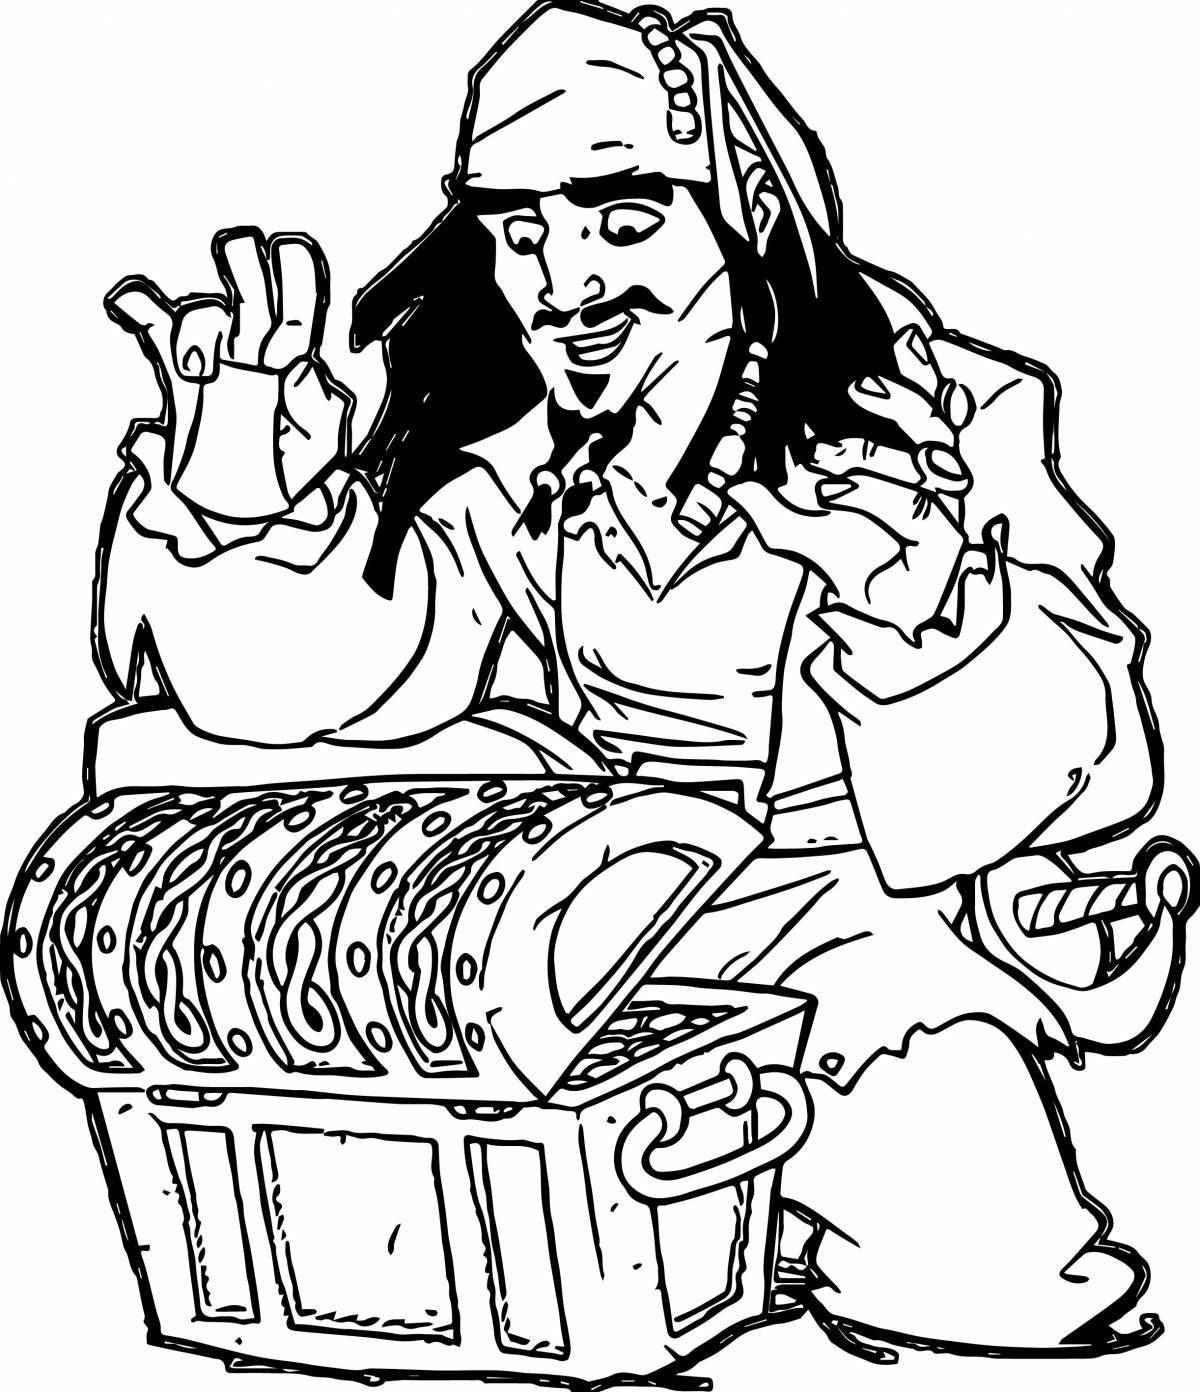 Courageous jack sparrow coloring page